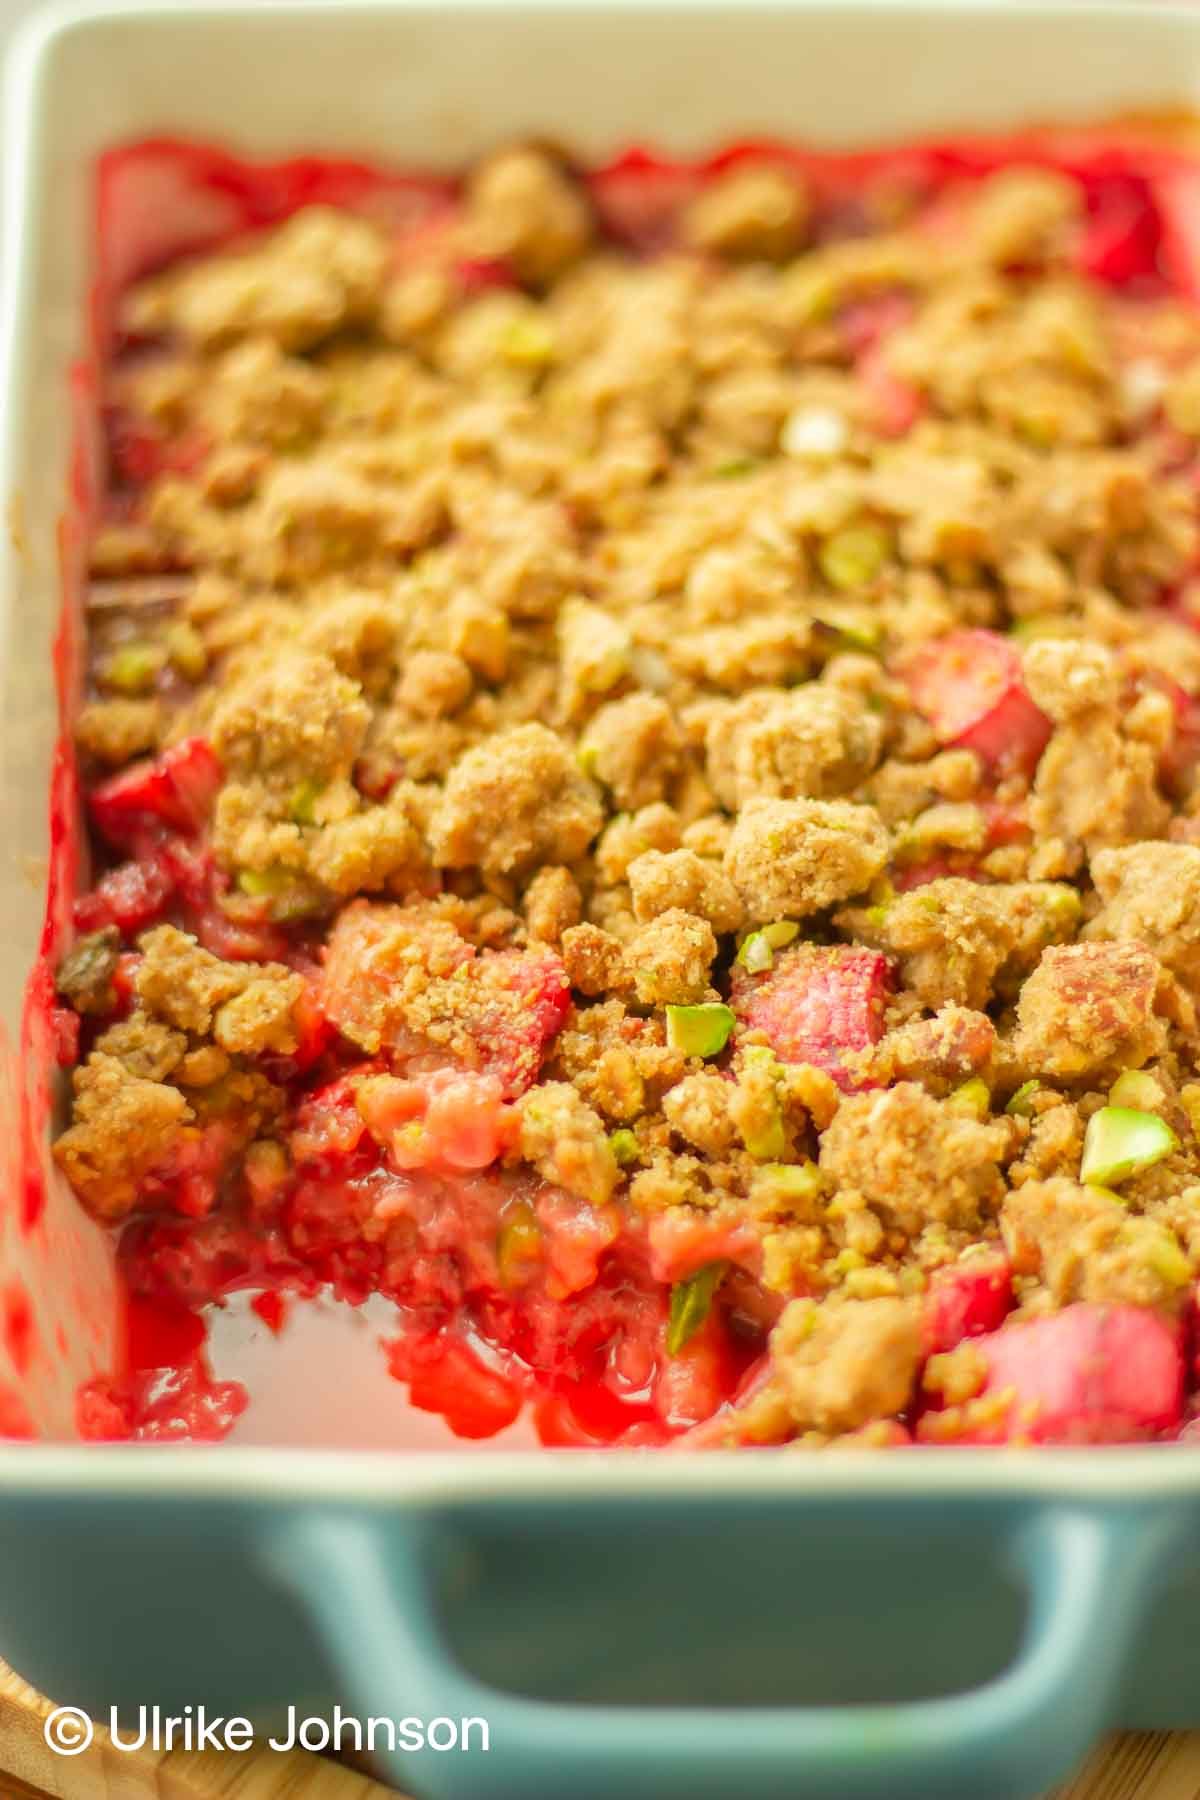 Strawberry Rhubarb Crumble with pistachio streusel topping in a blue casserole dish